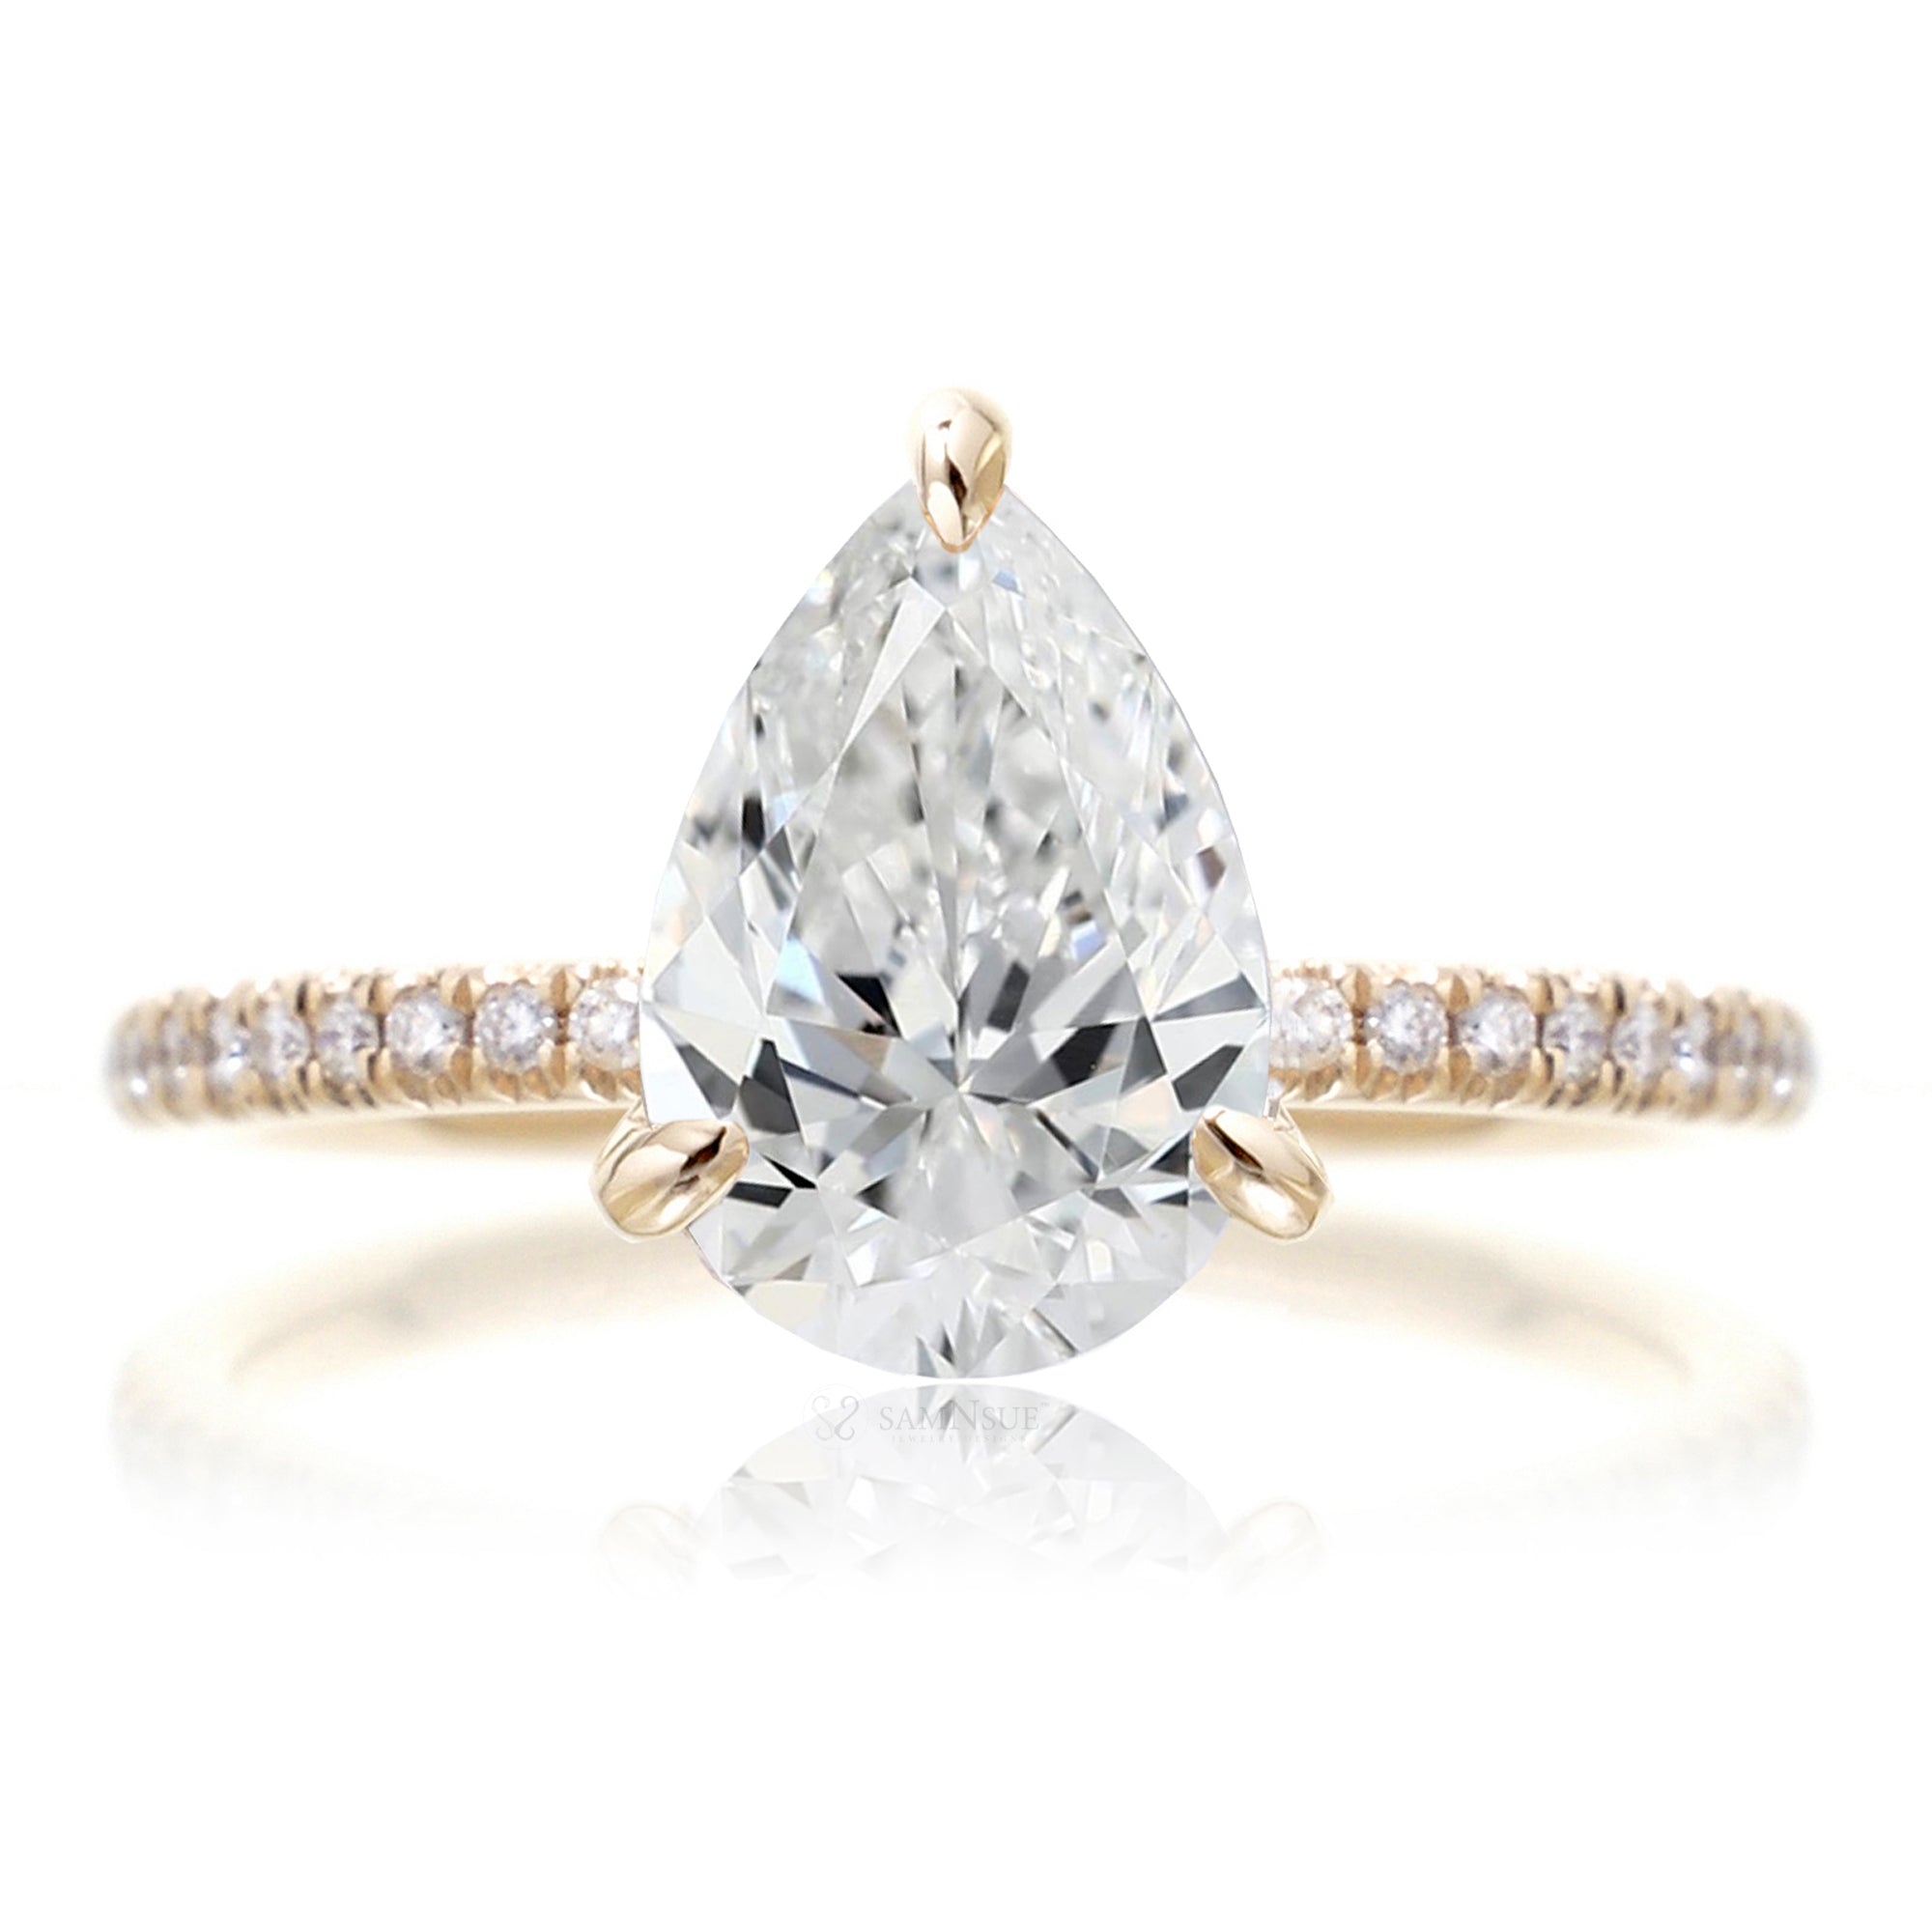 Pear cut lab-grown diamond engagement ring yellow gold - The Ava